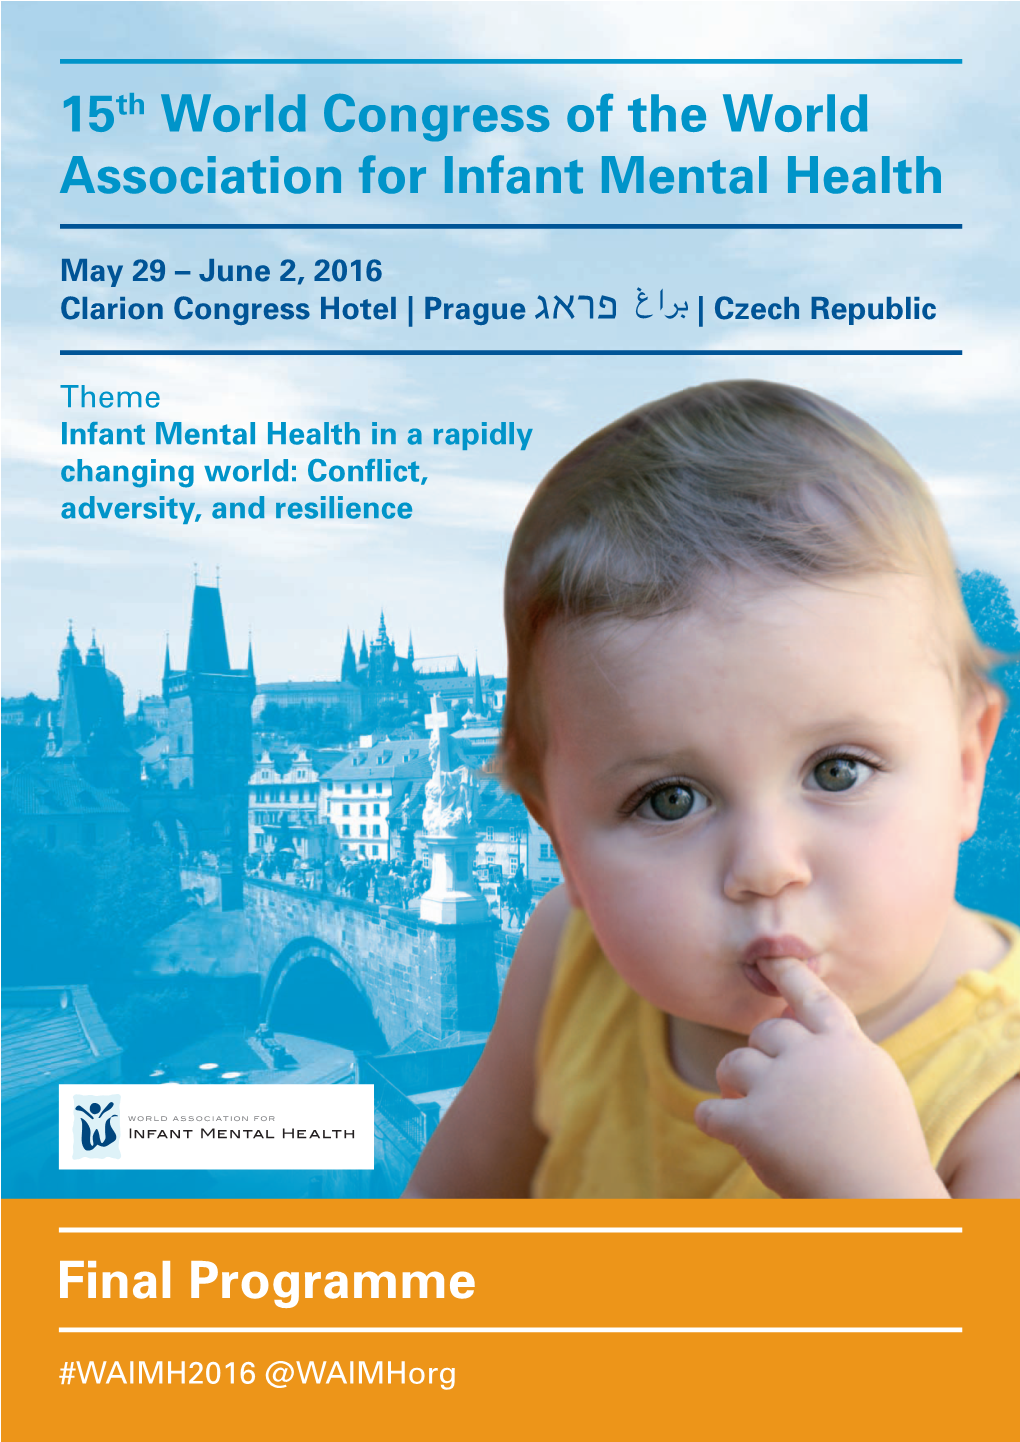 15Th World Congress of the World Association for Infant Mental Health